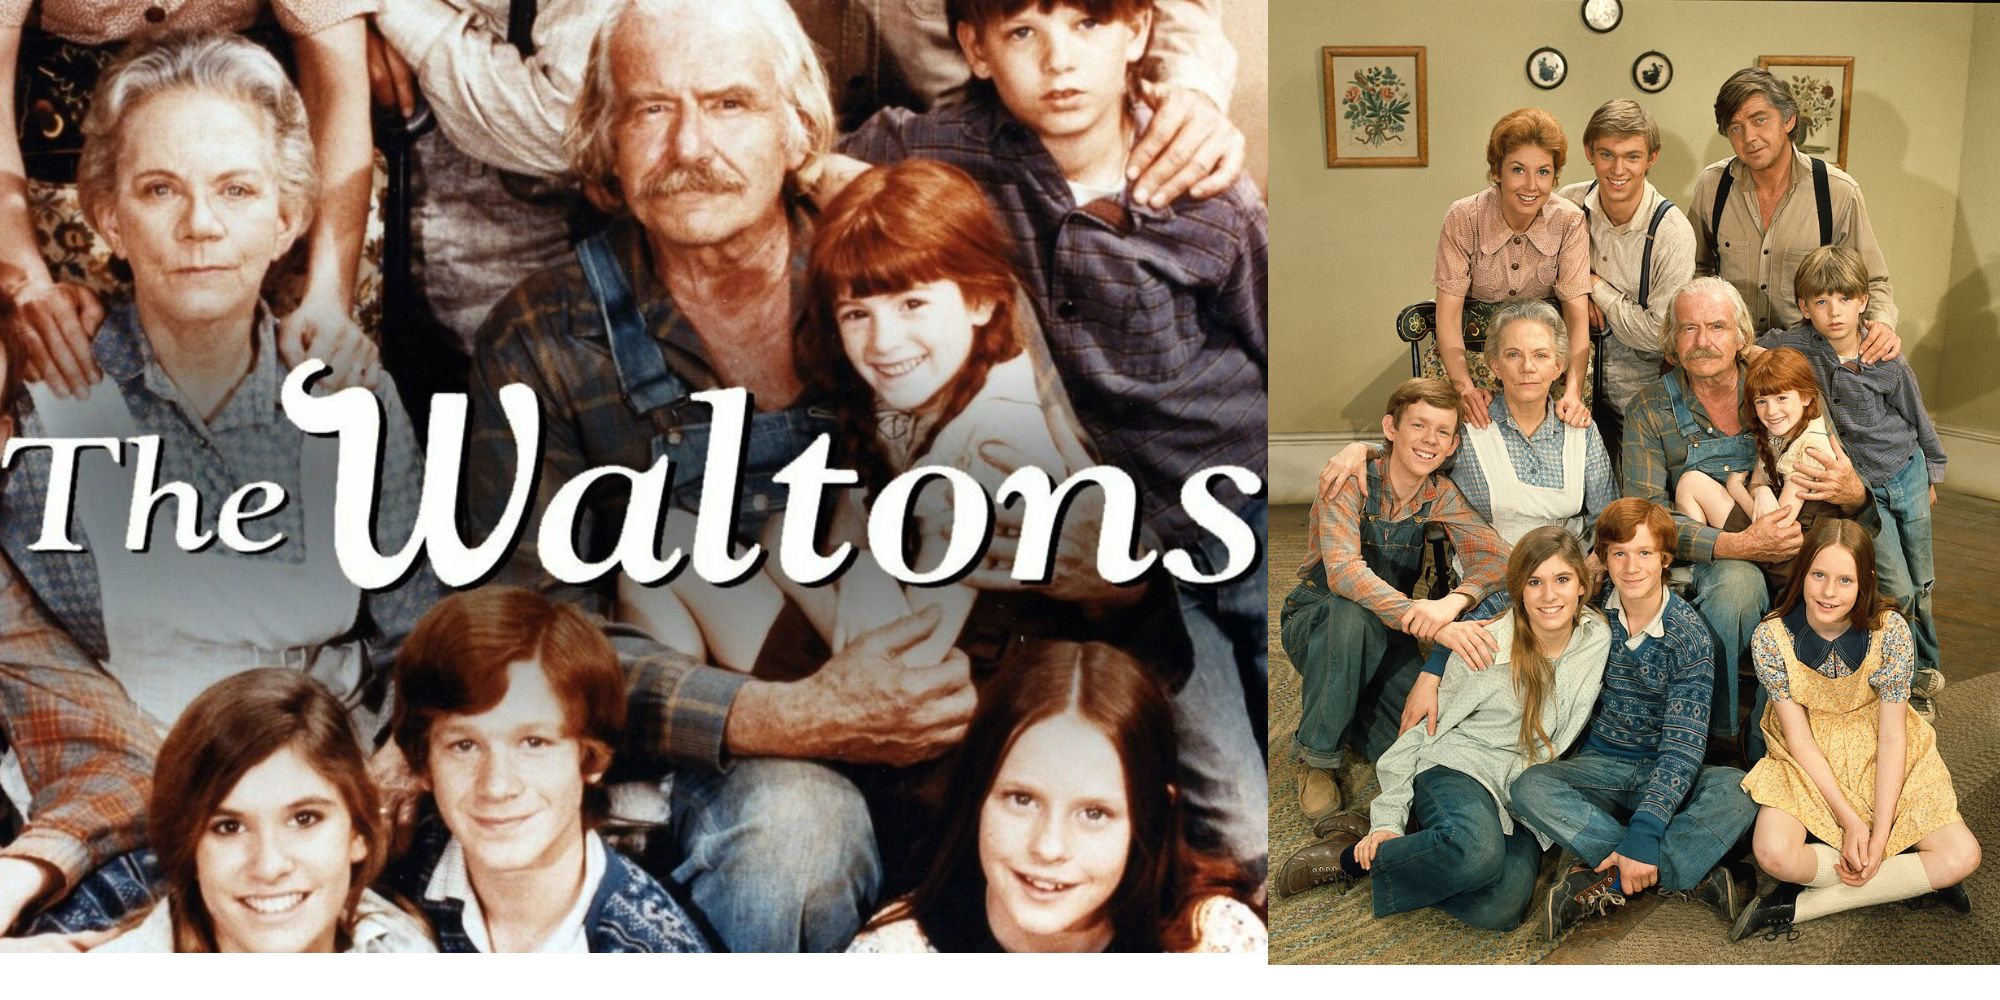 What Happened to Virginia on the Waltons?